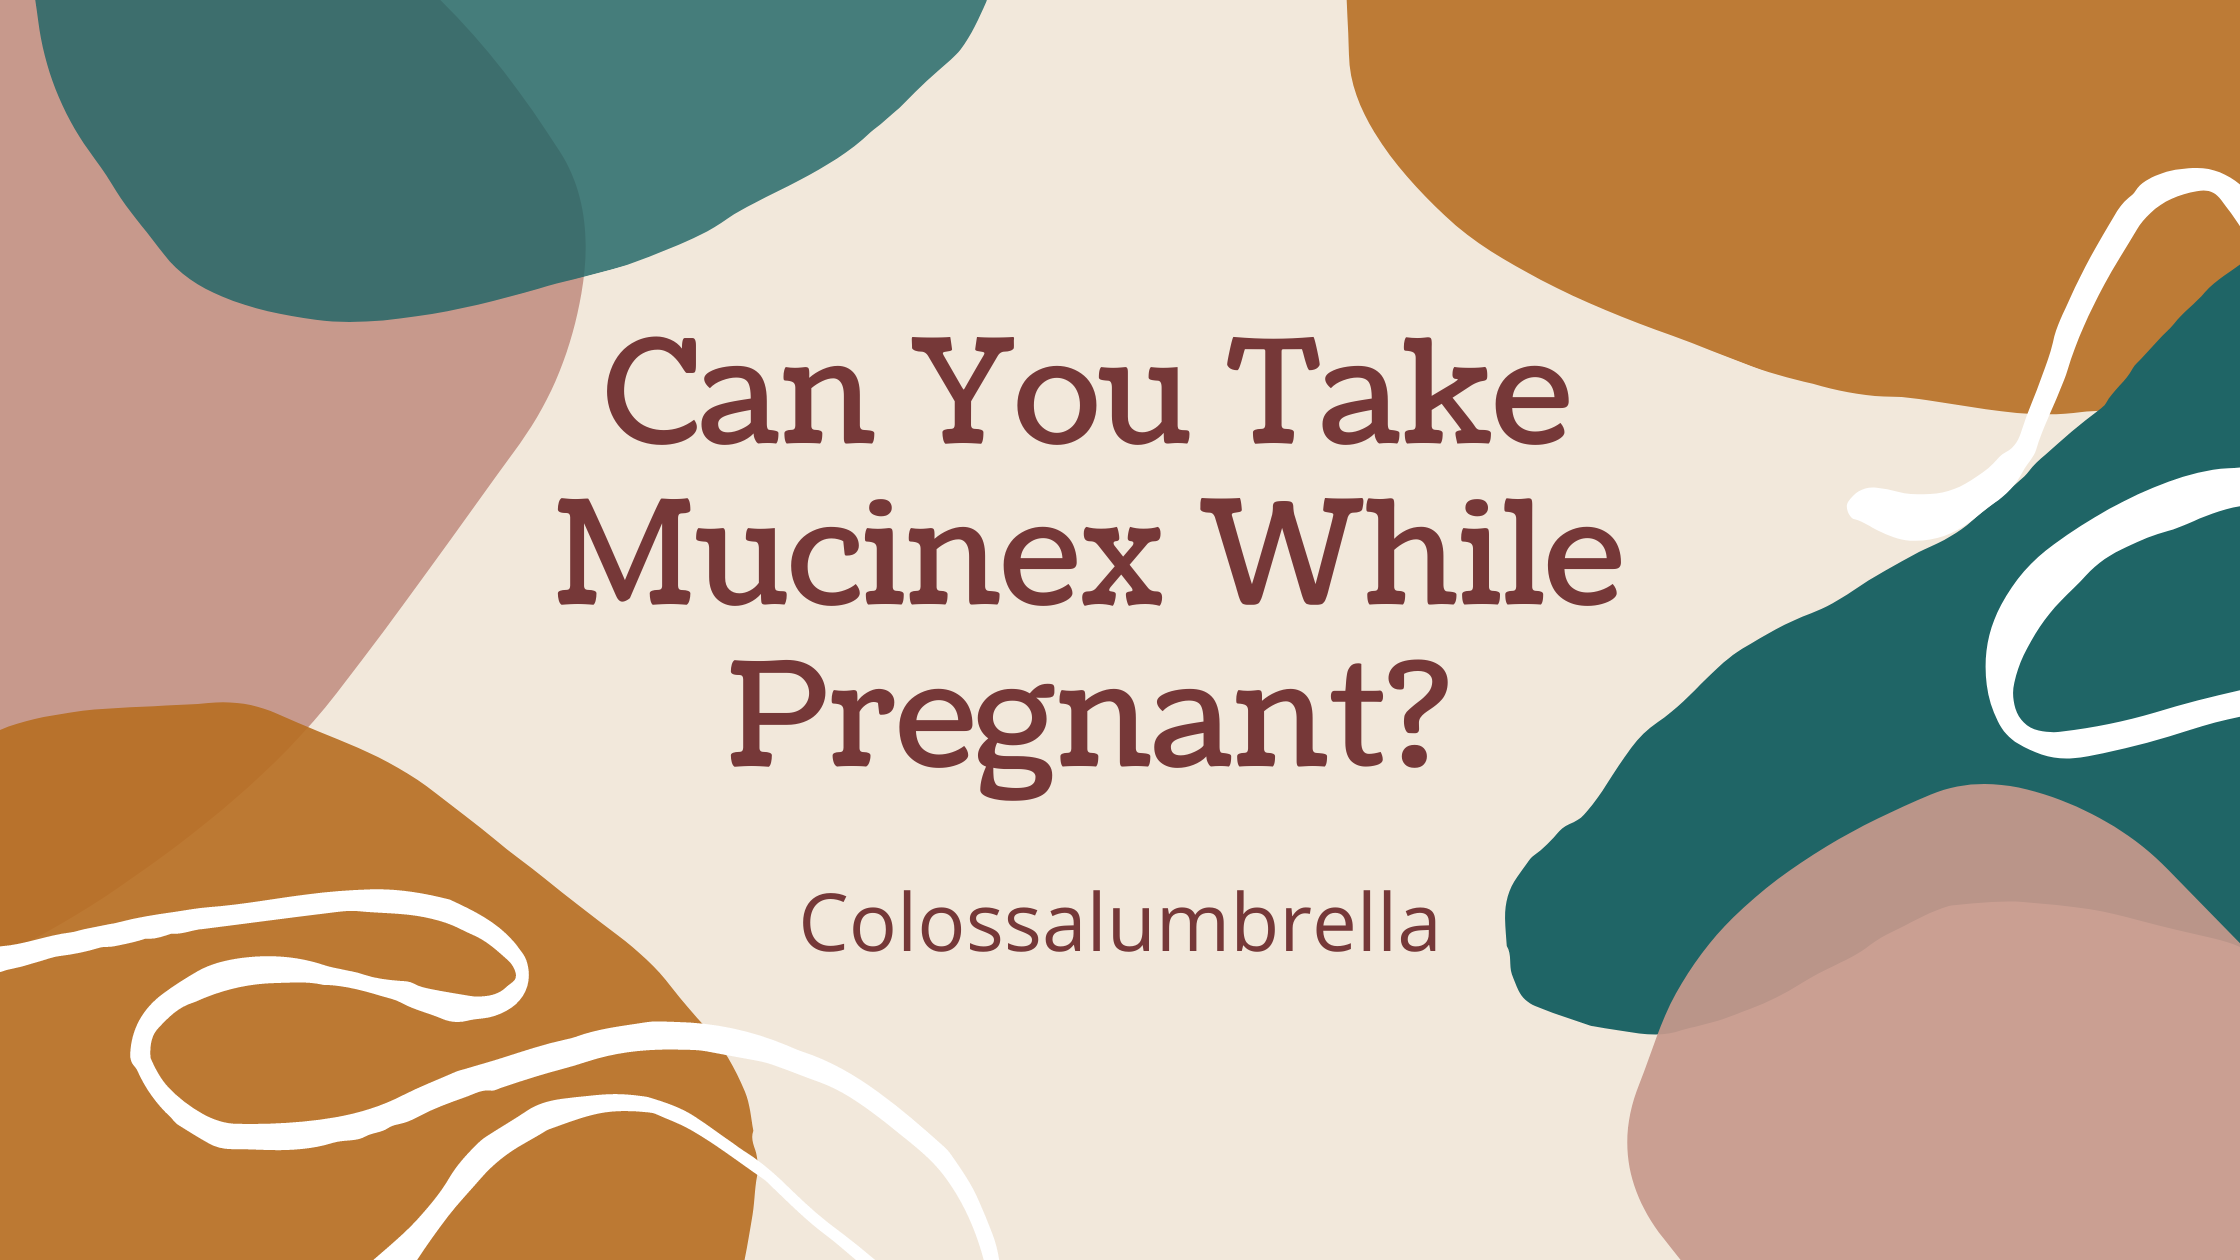 Can You Take Mucinex While Pregnant? – Important facts and myths